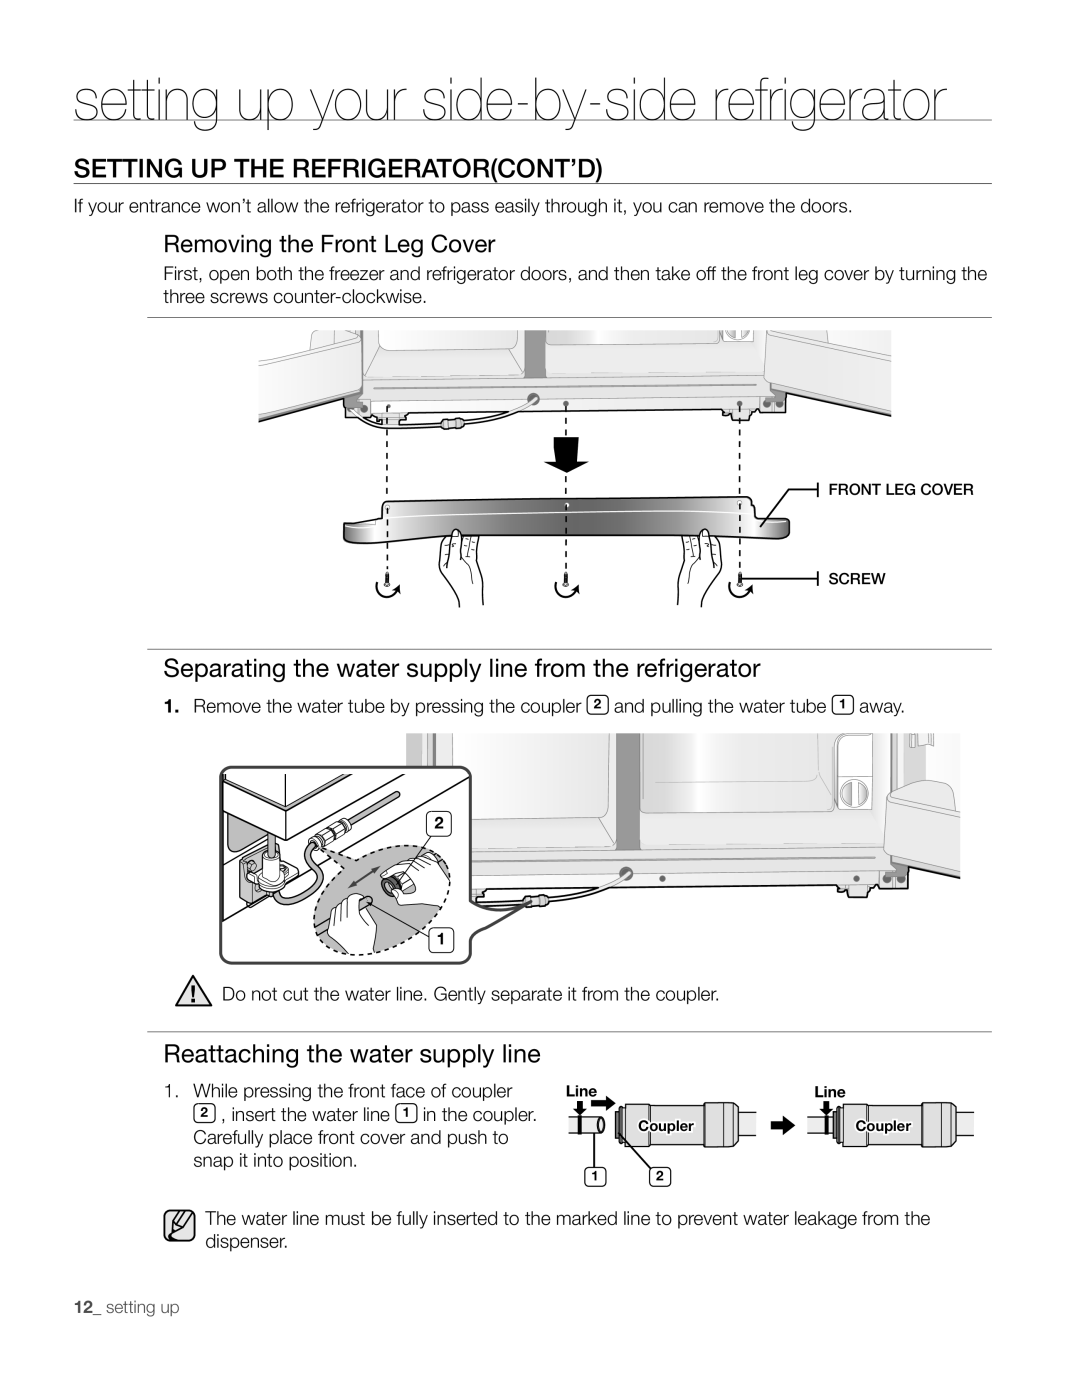 Samsung RS267TDBP user manual SETTING UP the refrigeratorCONT’D, Separating the water supply line from the refrigerator 